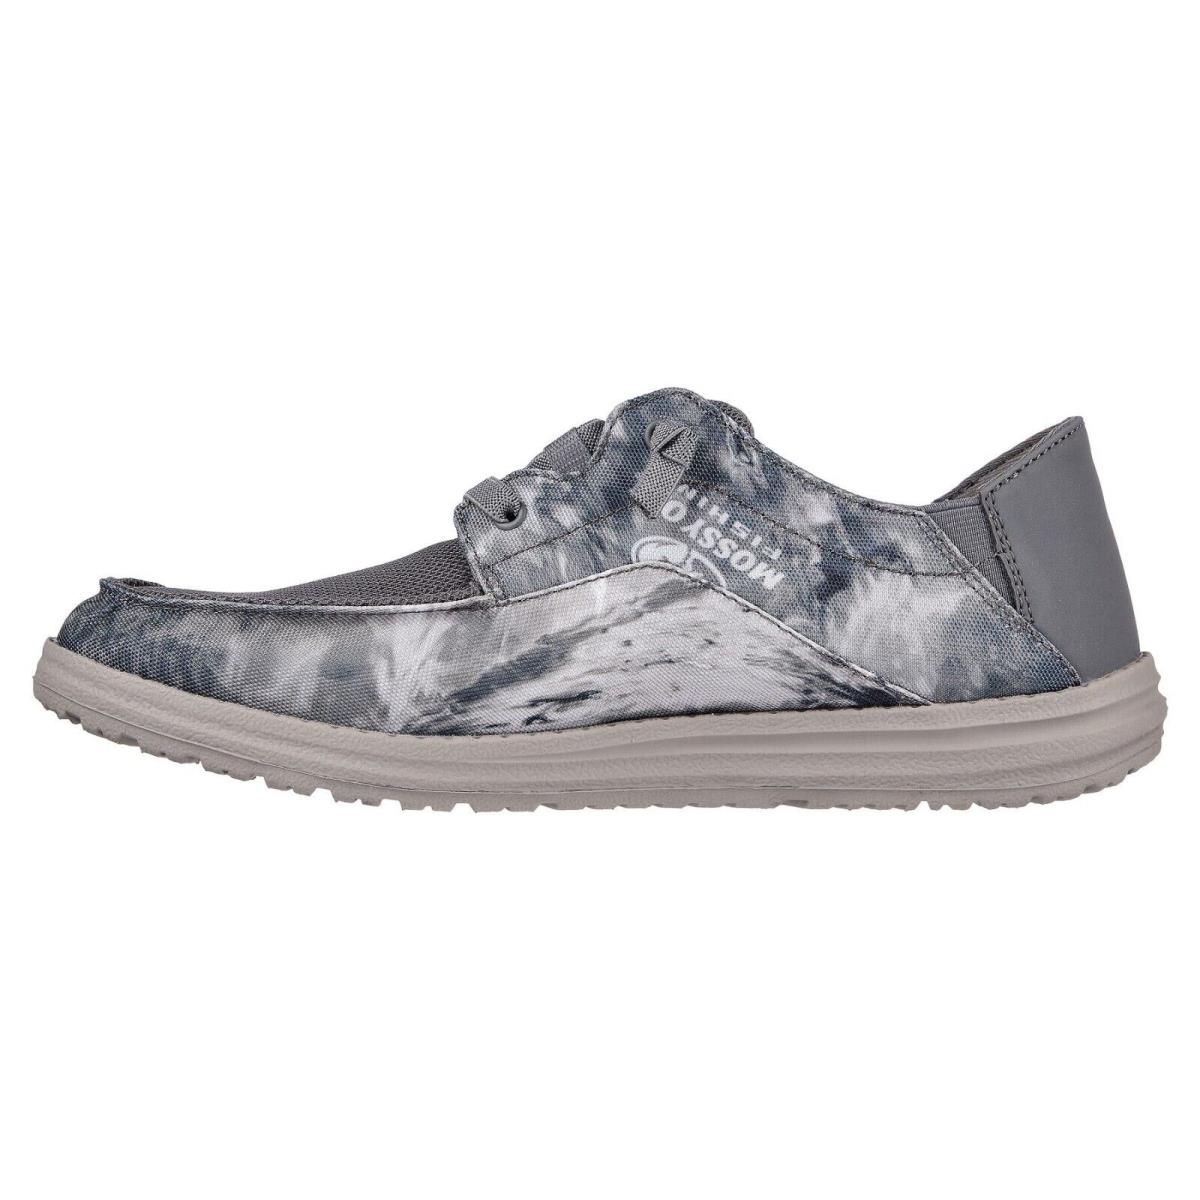 Skechers shoes Melson Topher - Gray 7